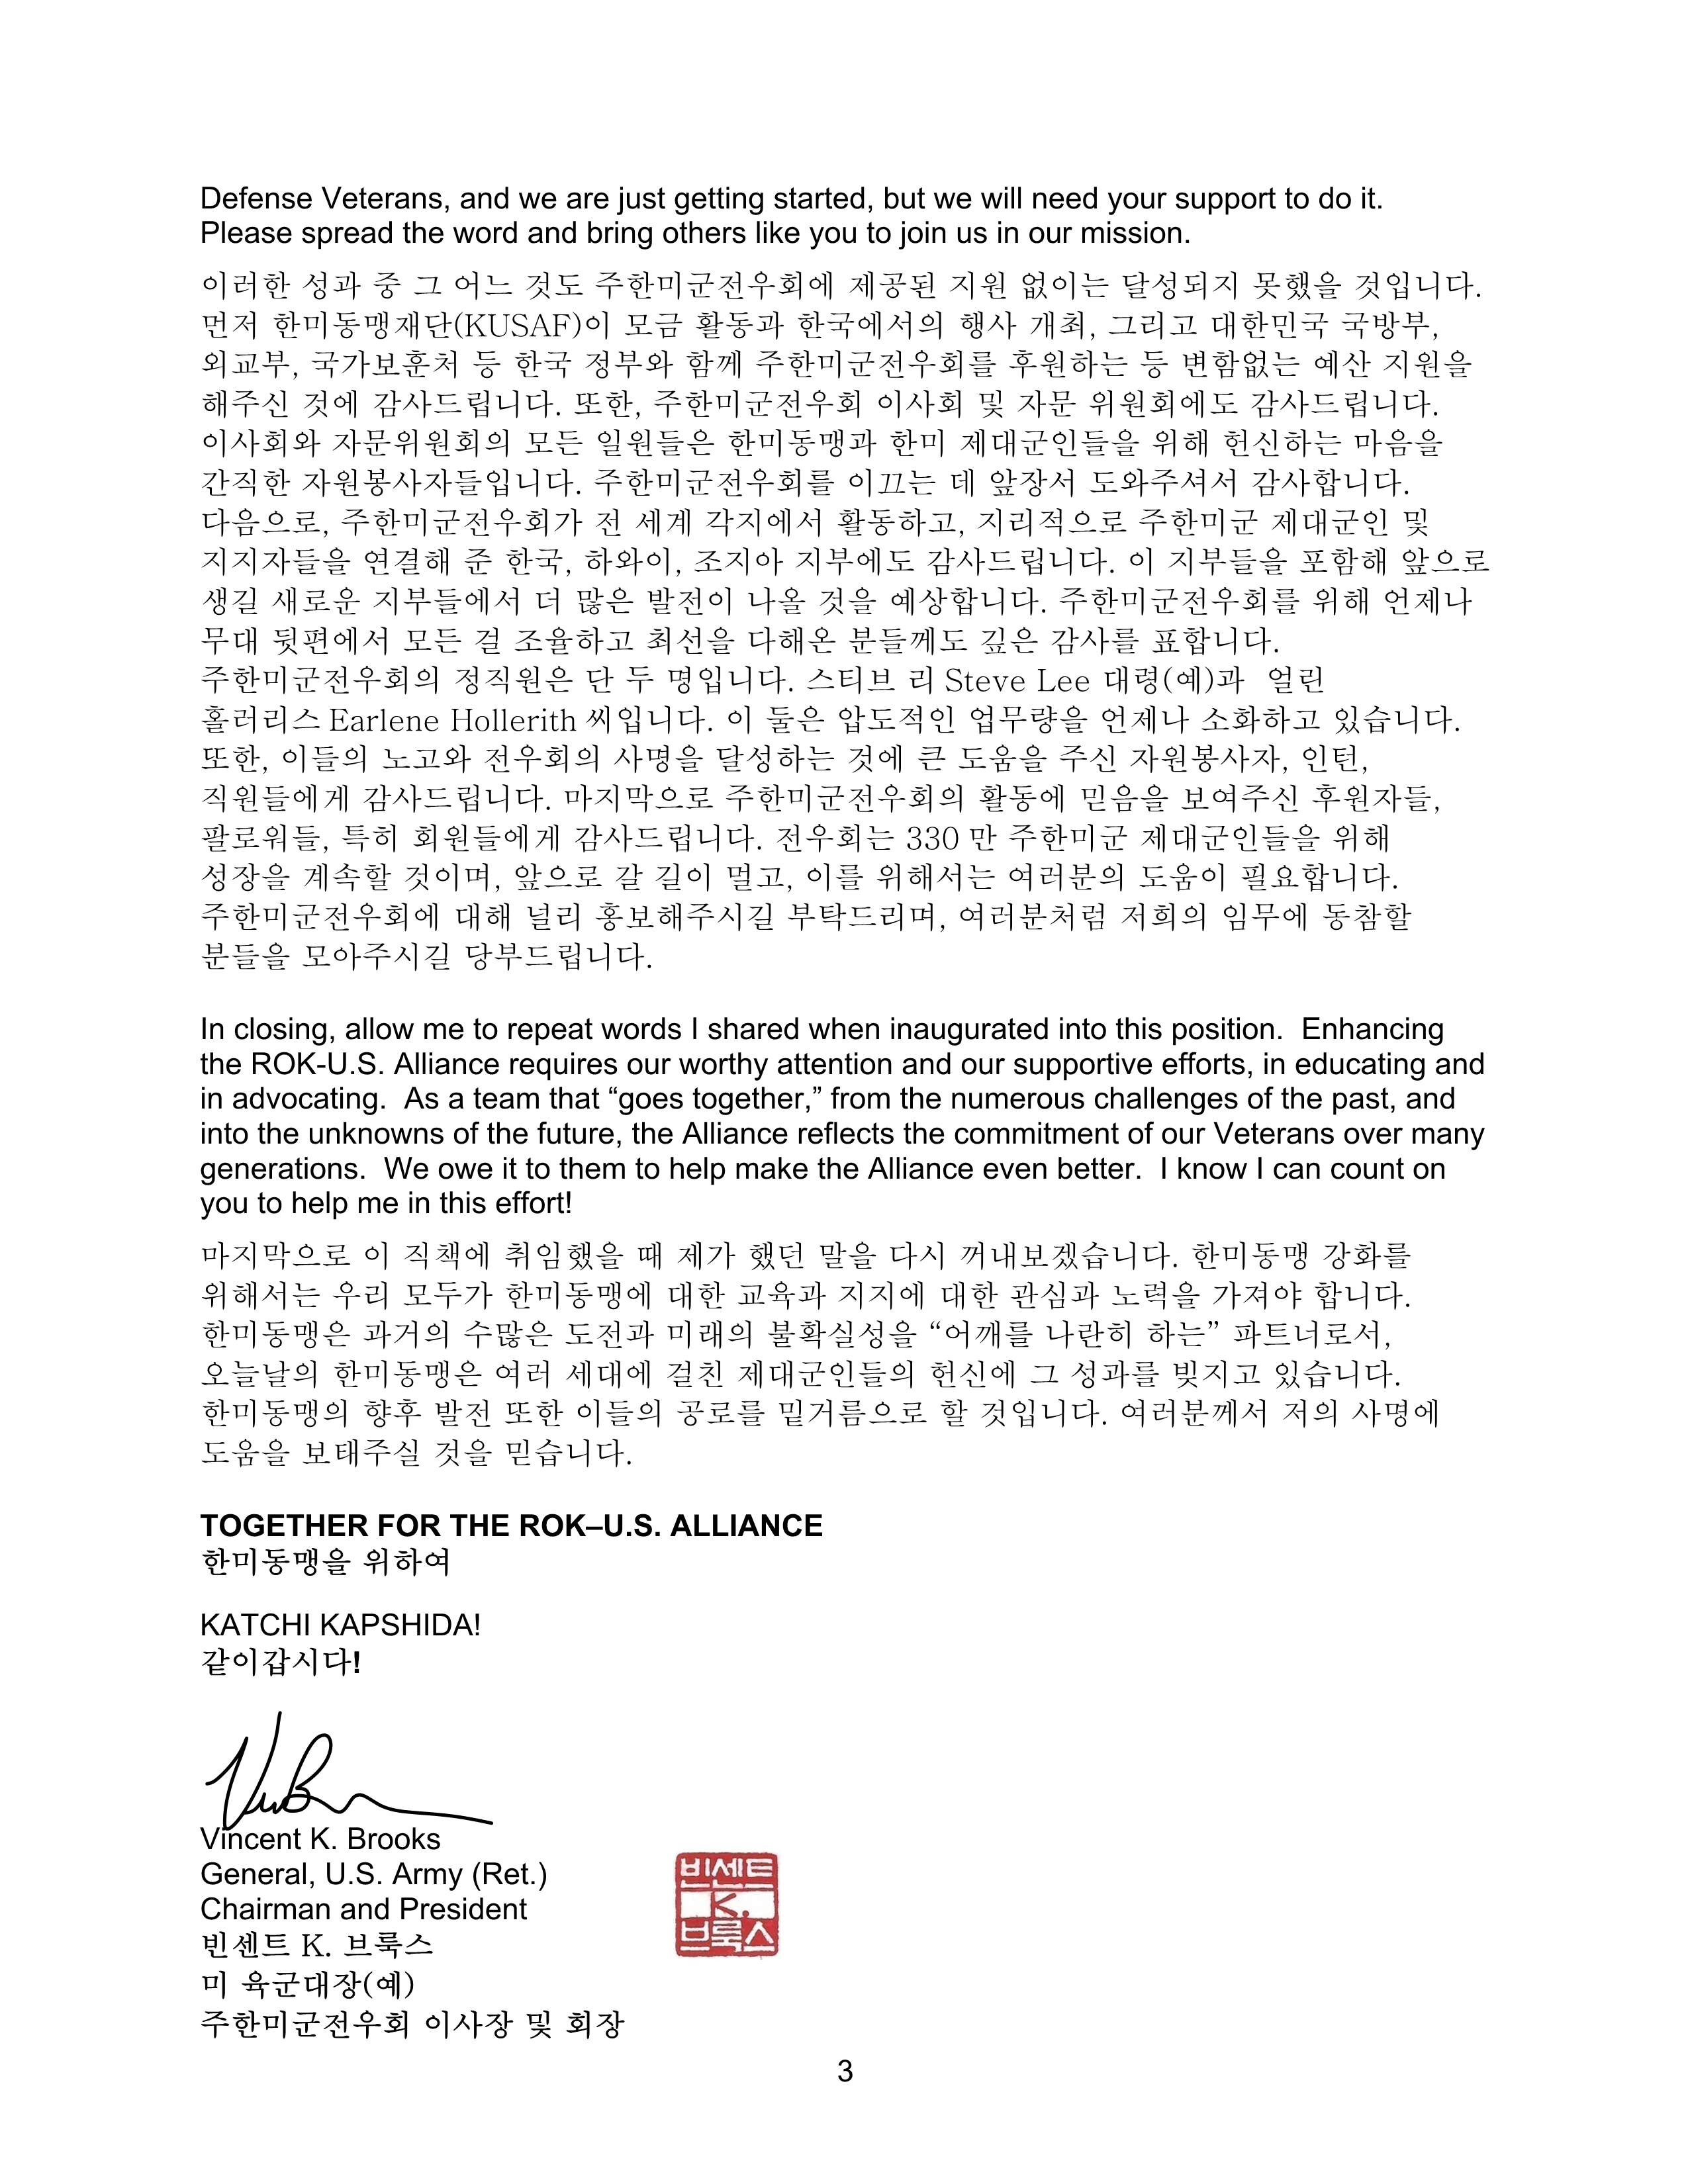 General Brooks_Farewell Letter_Final_20230130_3.png